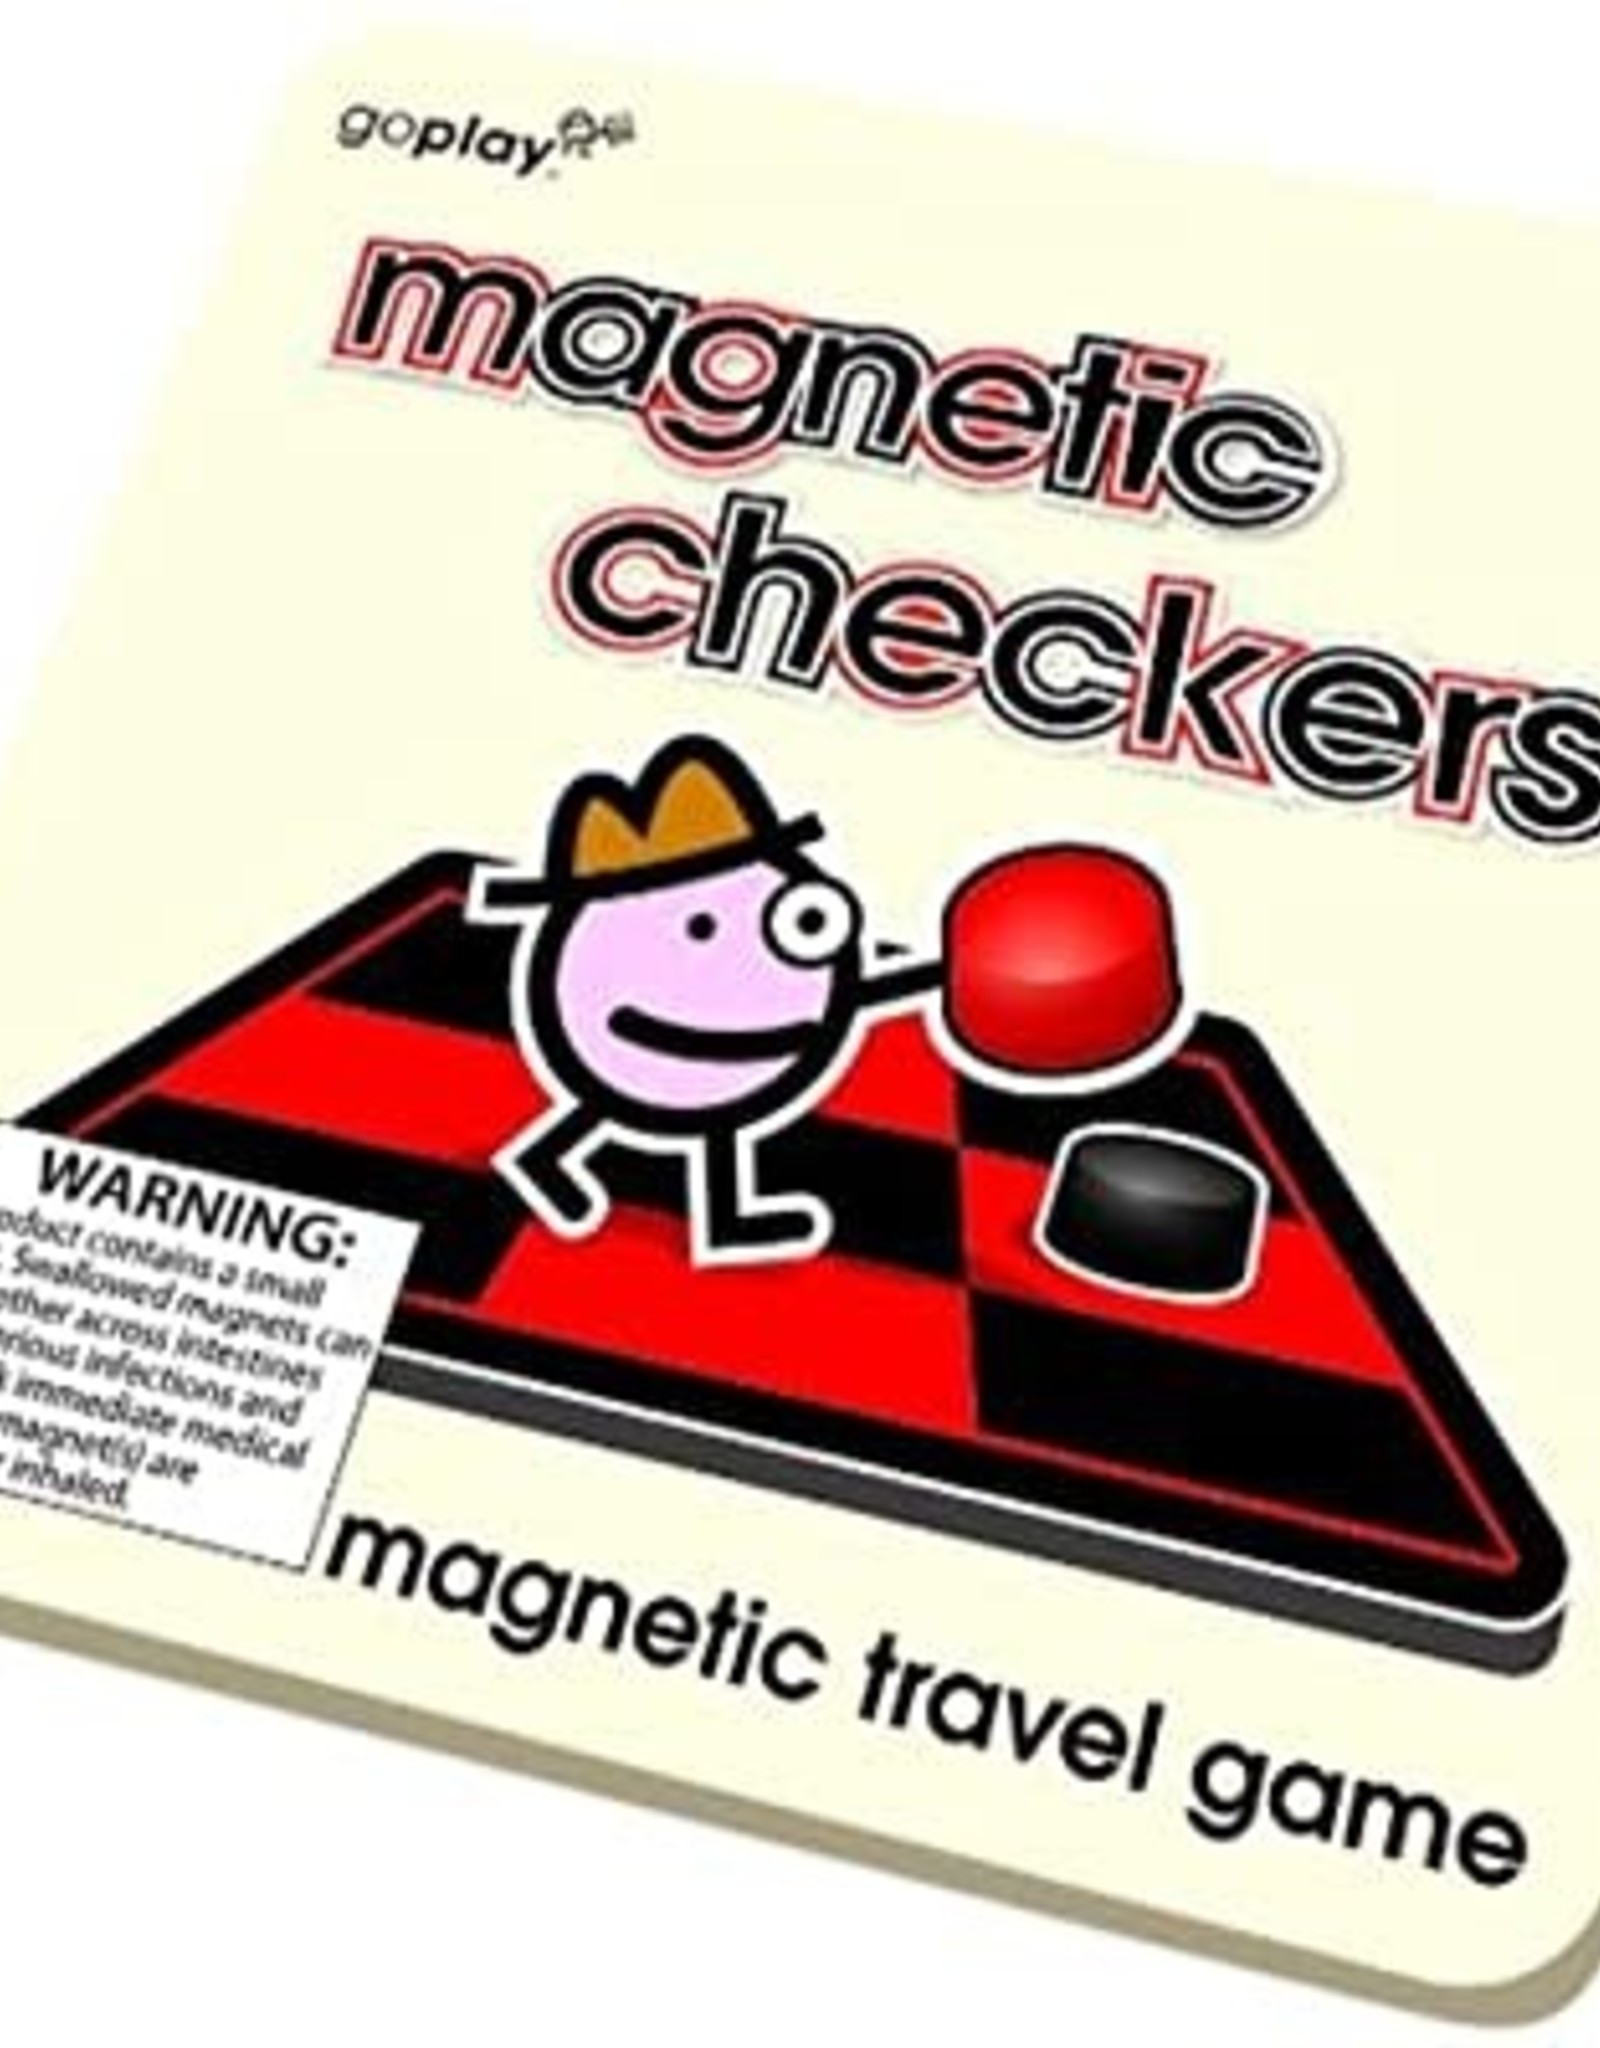 Toysmith Magnetic Checkers